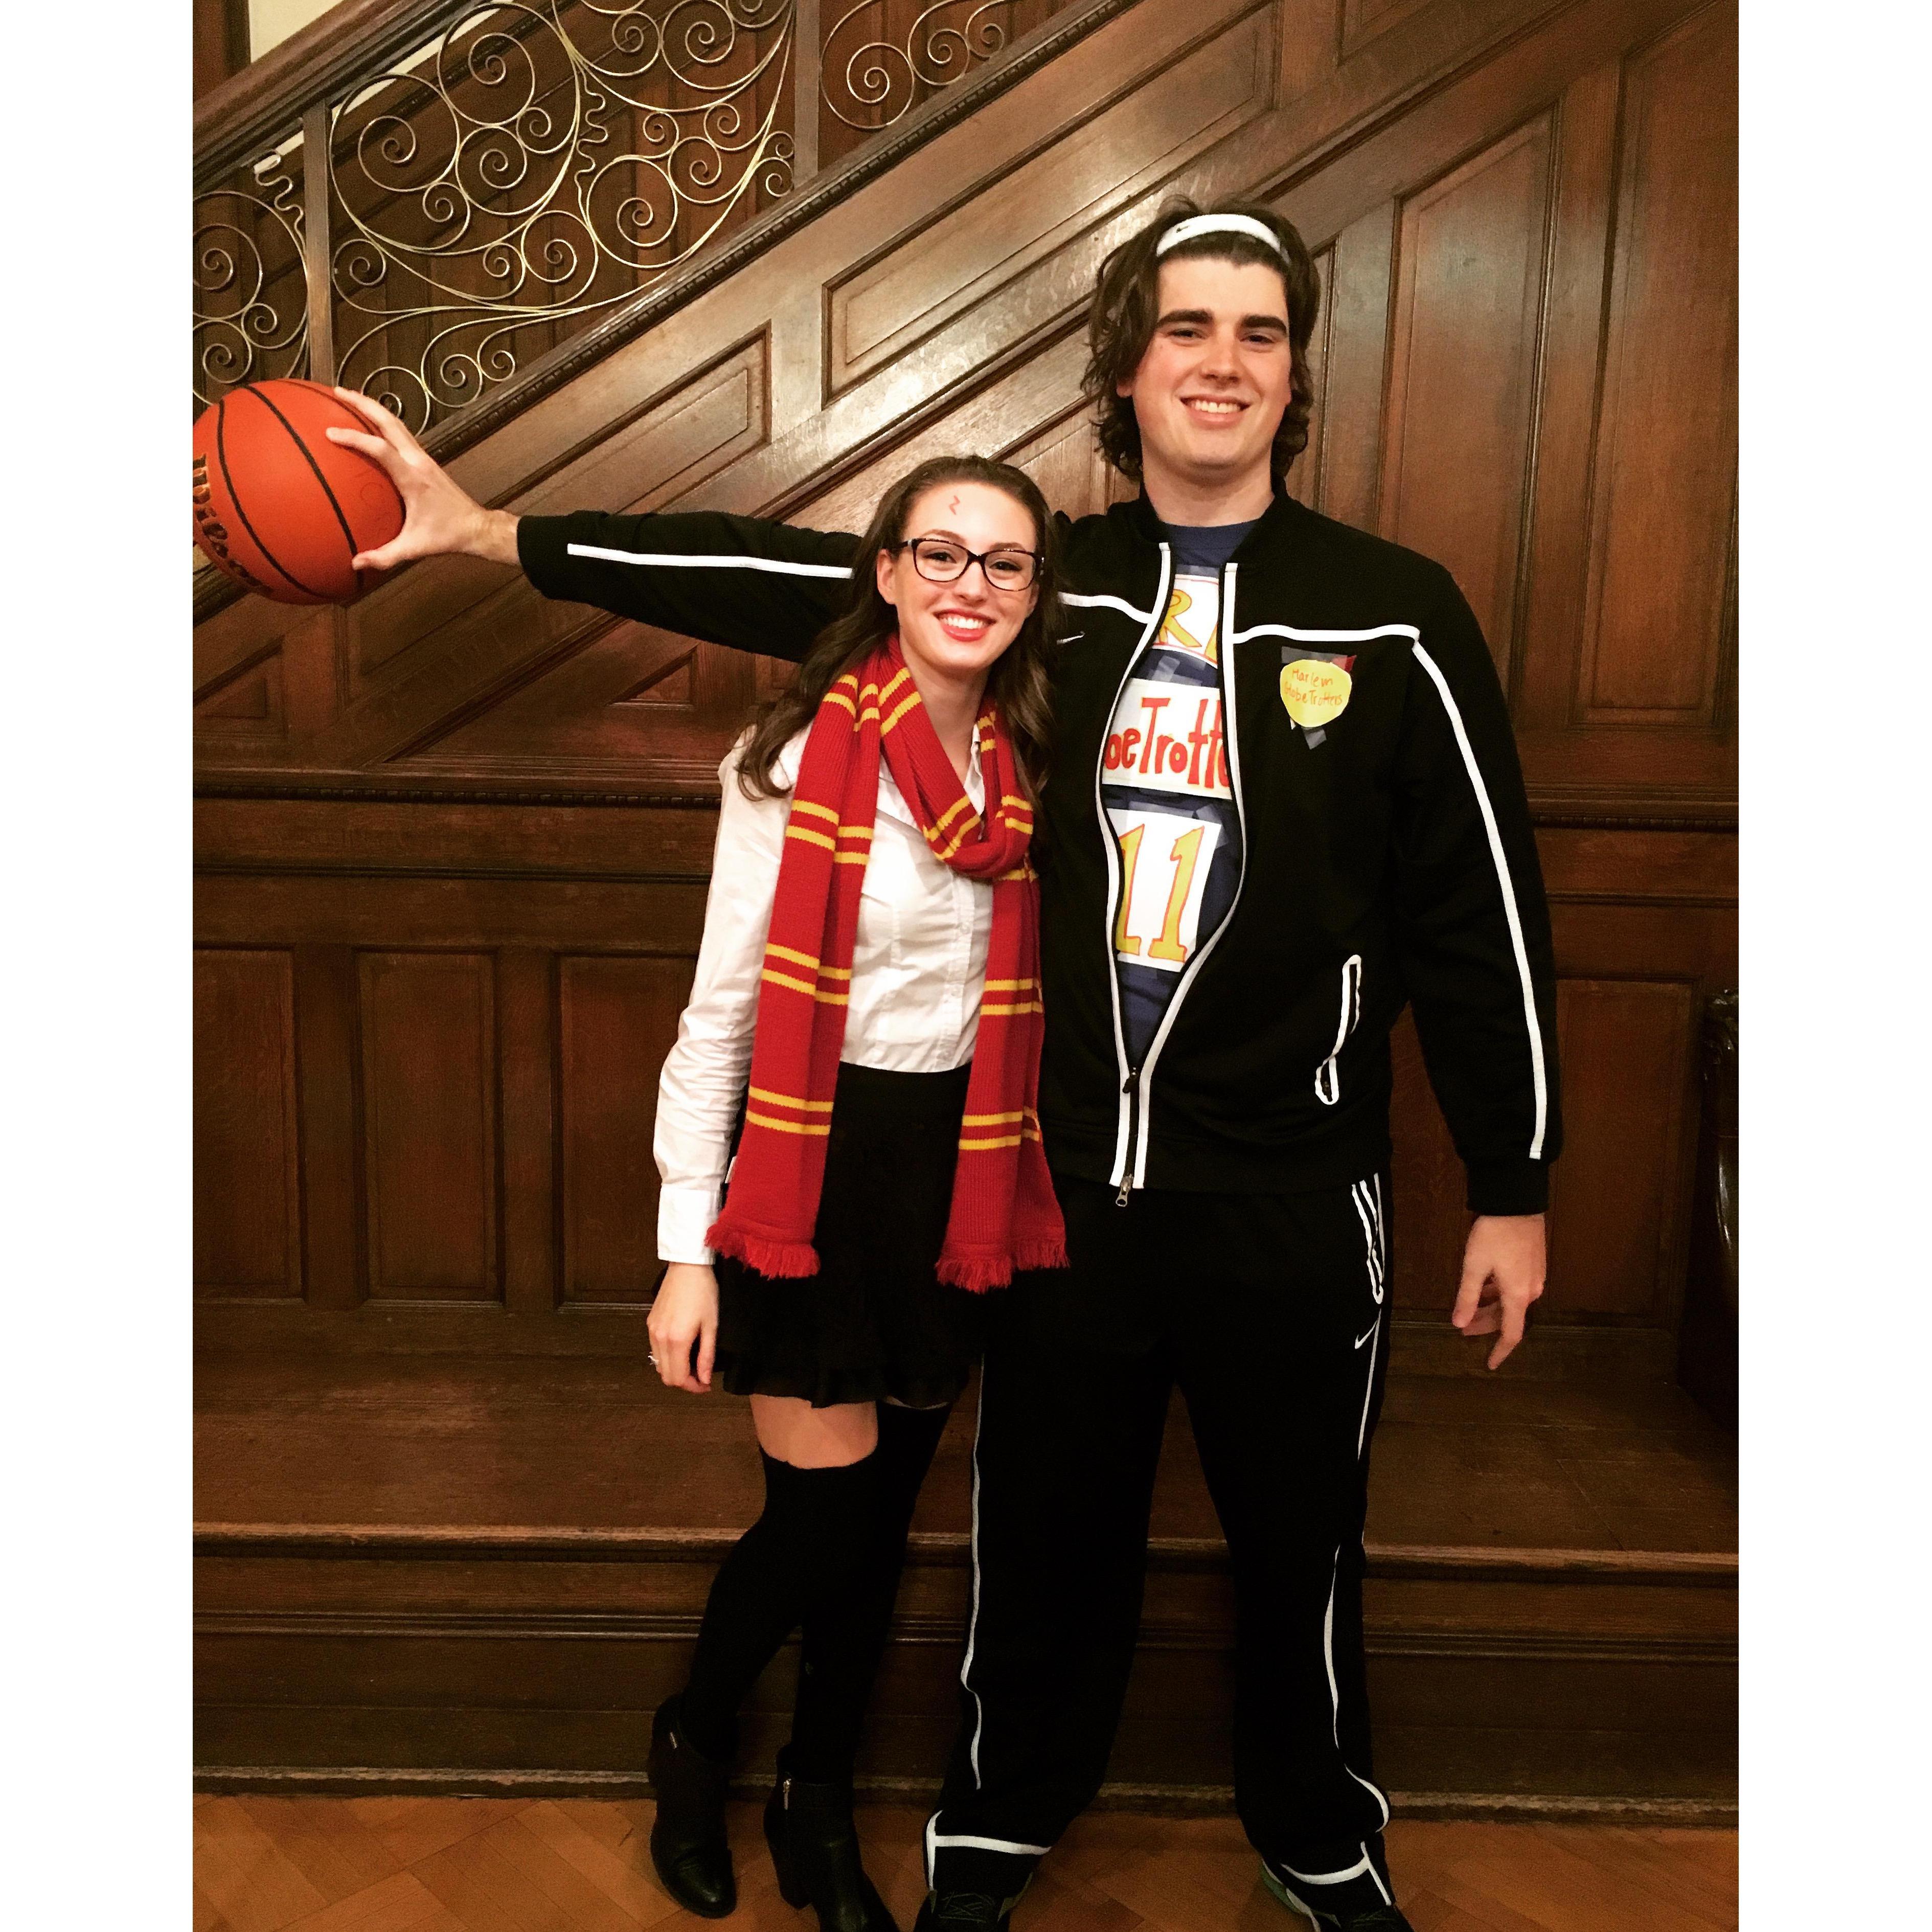 A sorority date night at UGA. Themed "rhyme without reason"= Harry Potter and a Harlem Globetrotter 😂